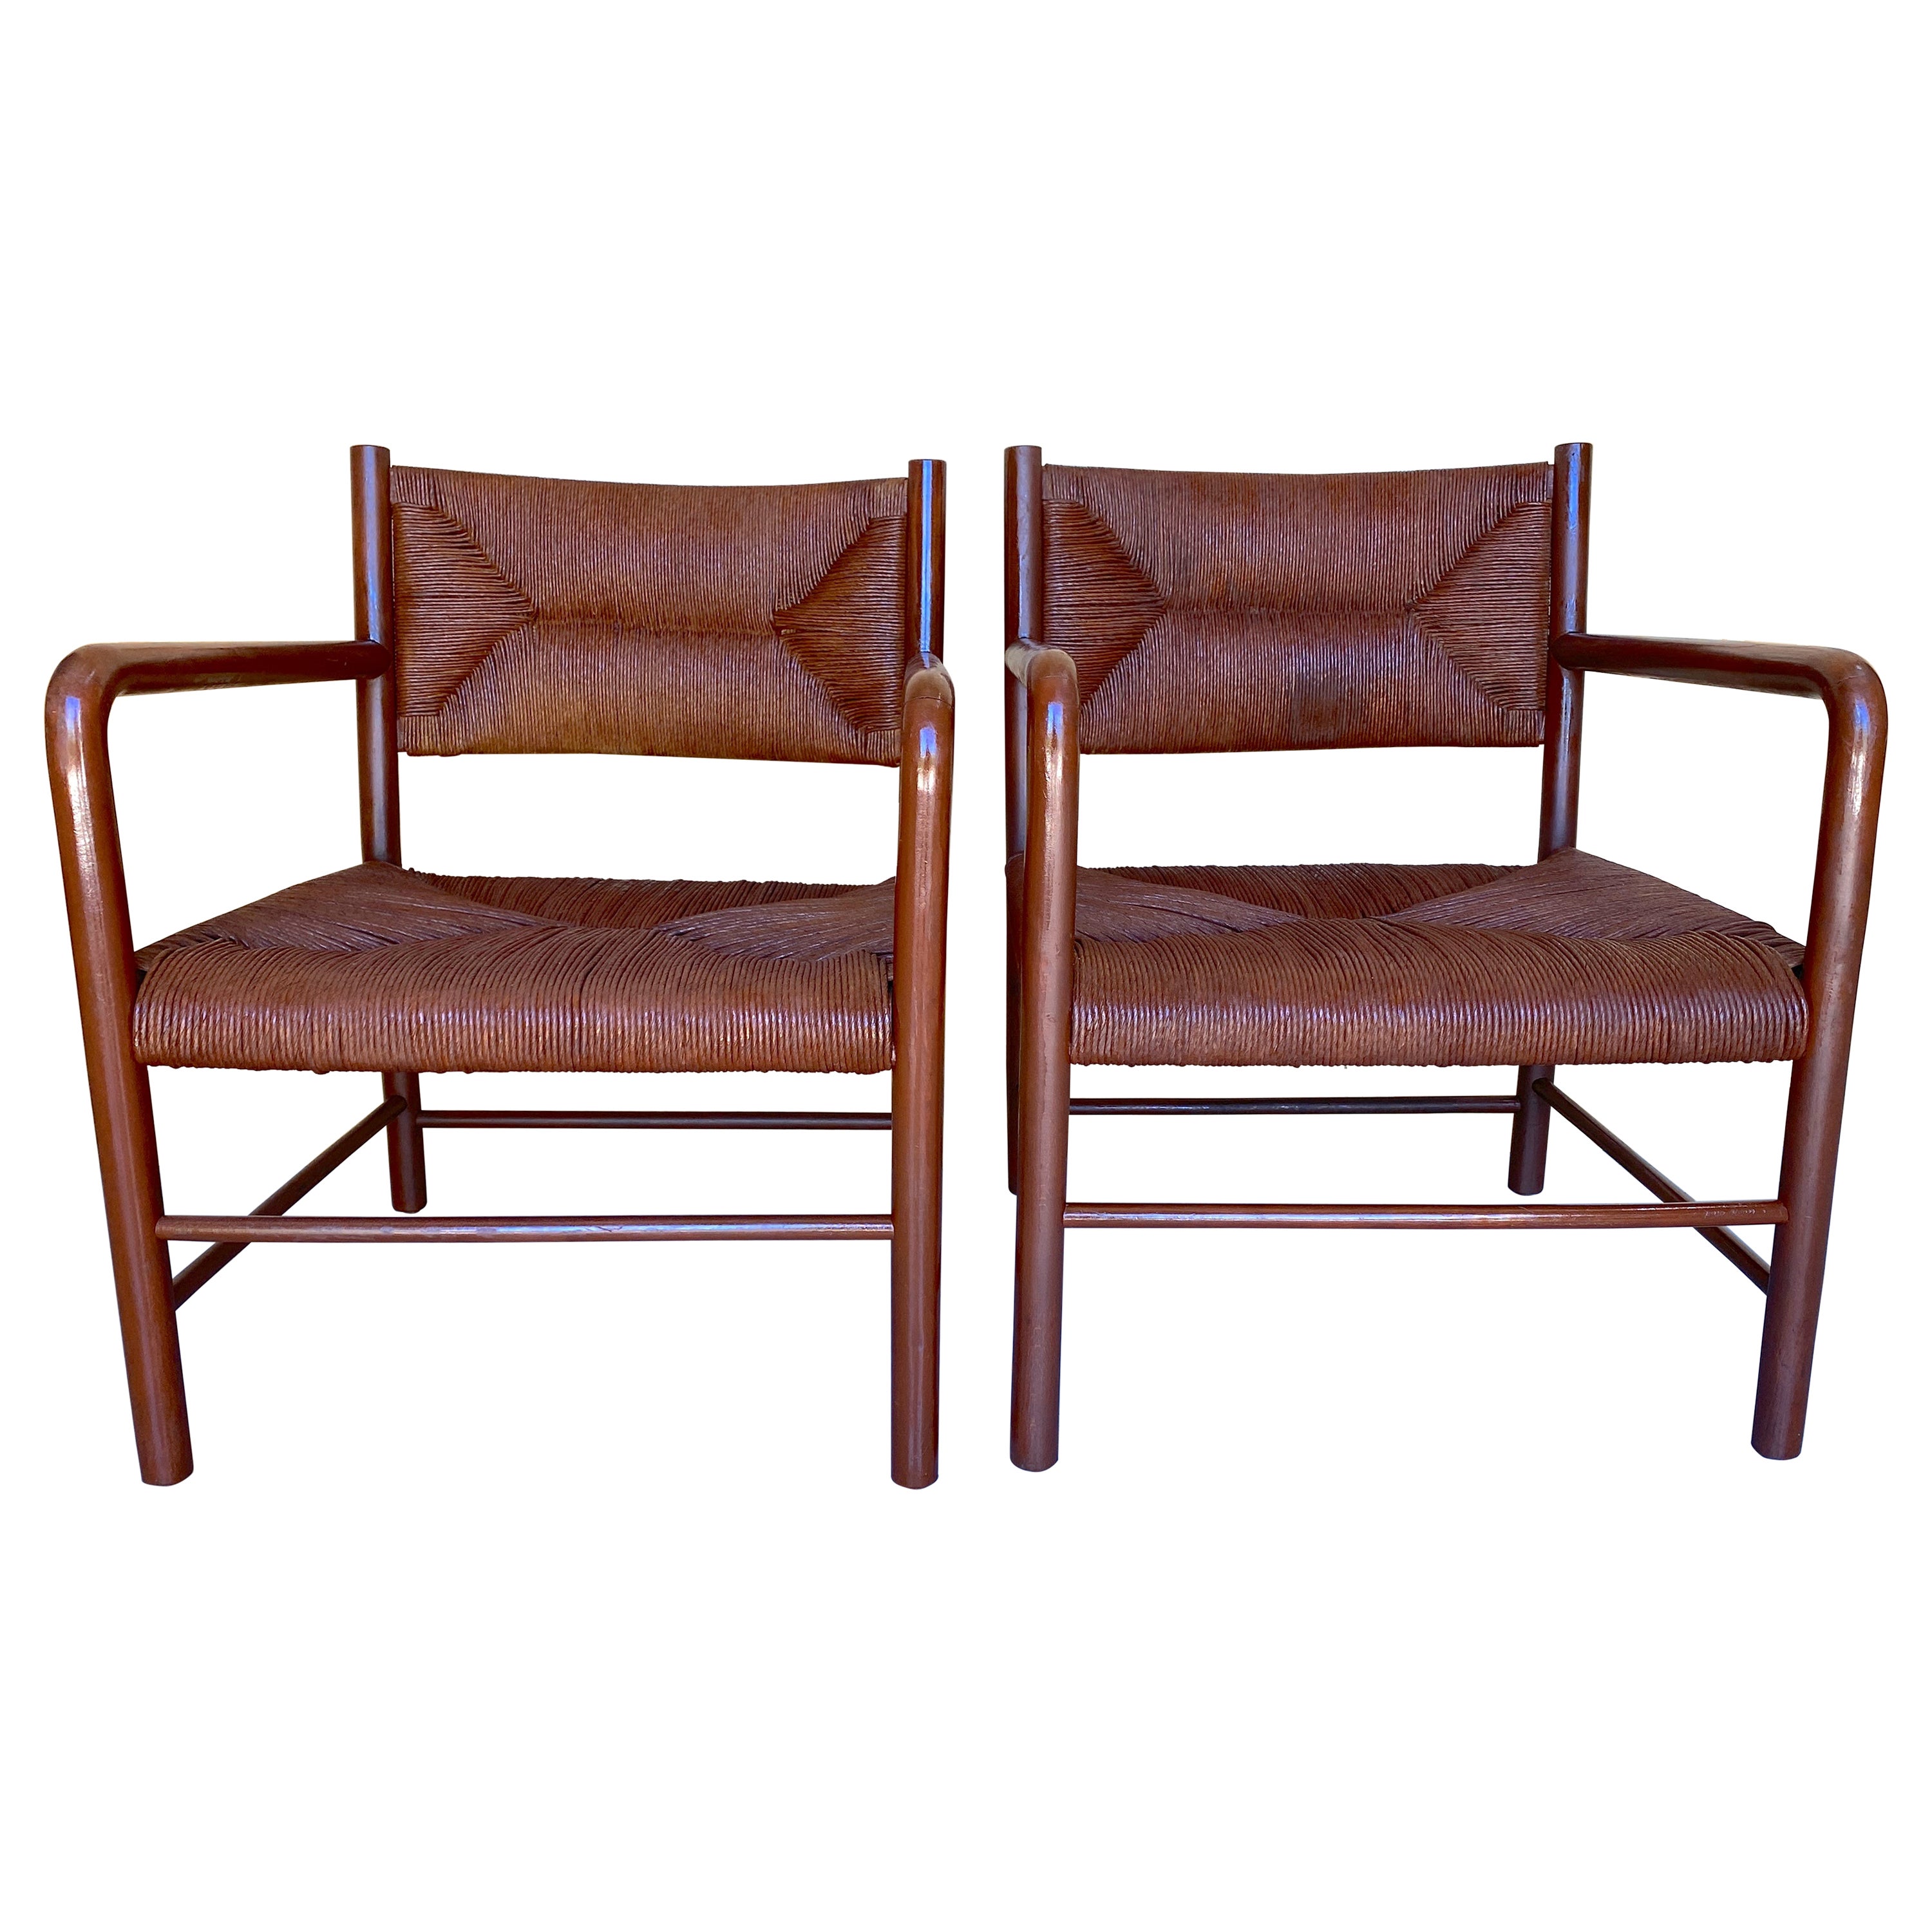 Pair of Emanuele Rambaldi Modernist Brown Lacquered Armchairs, Italy 1940s For Sale